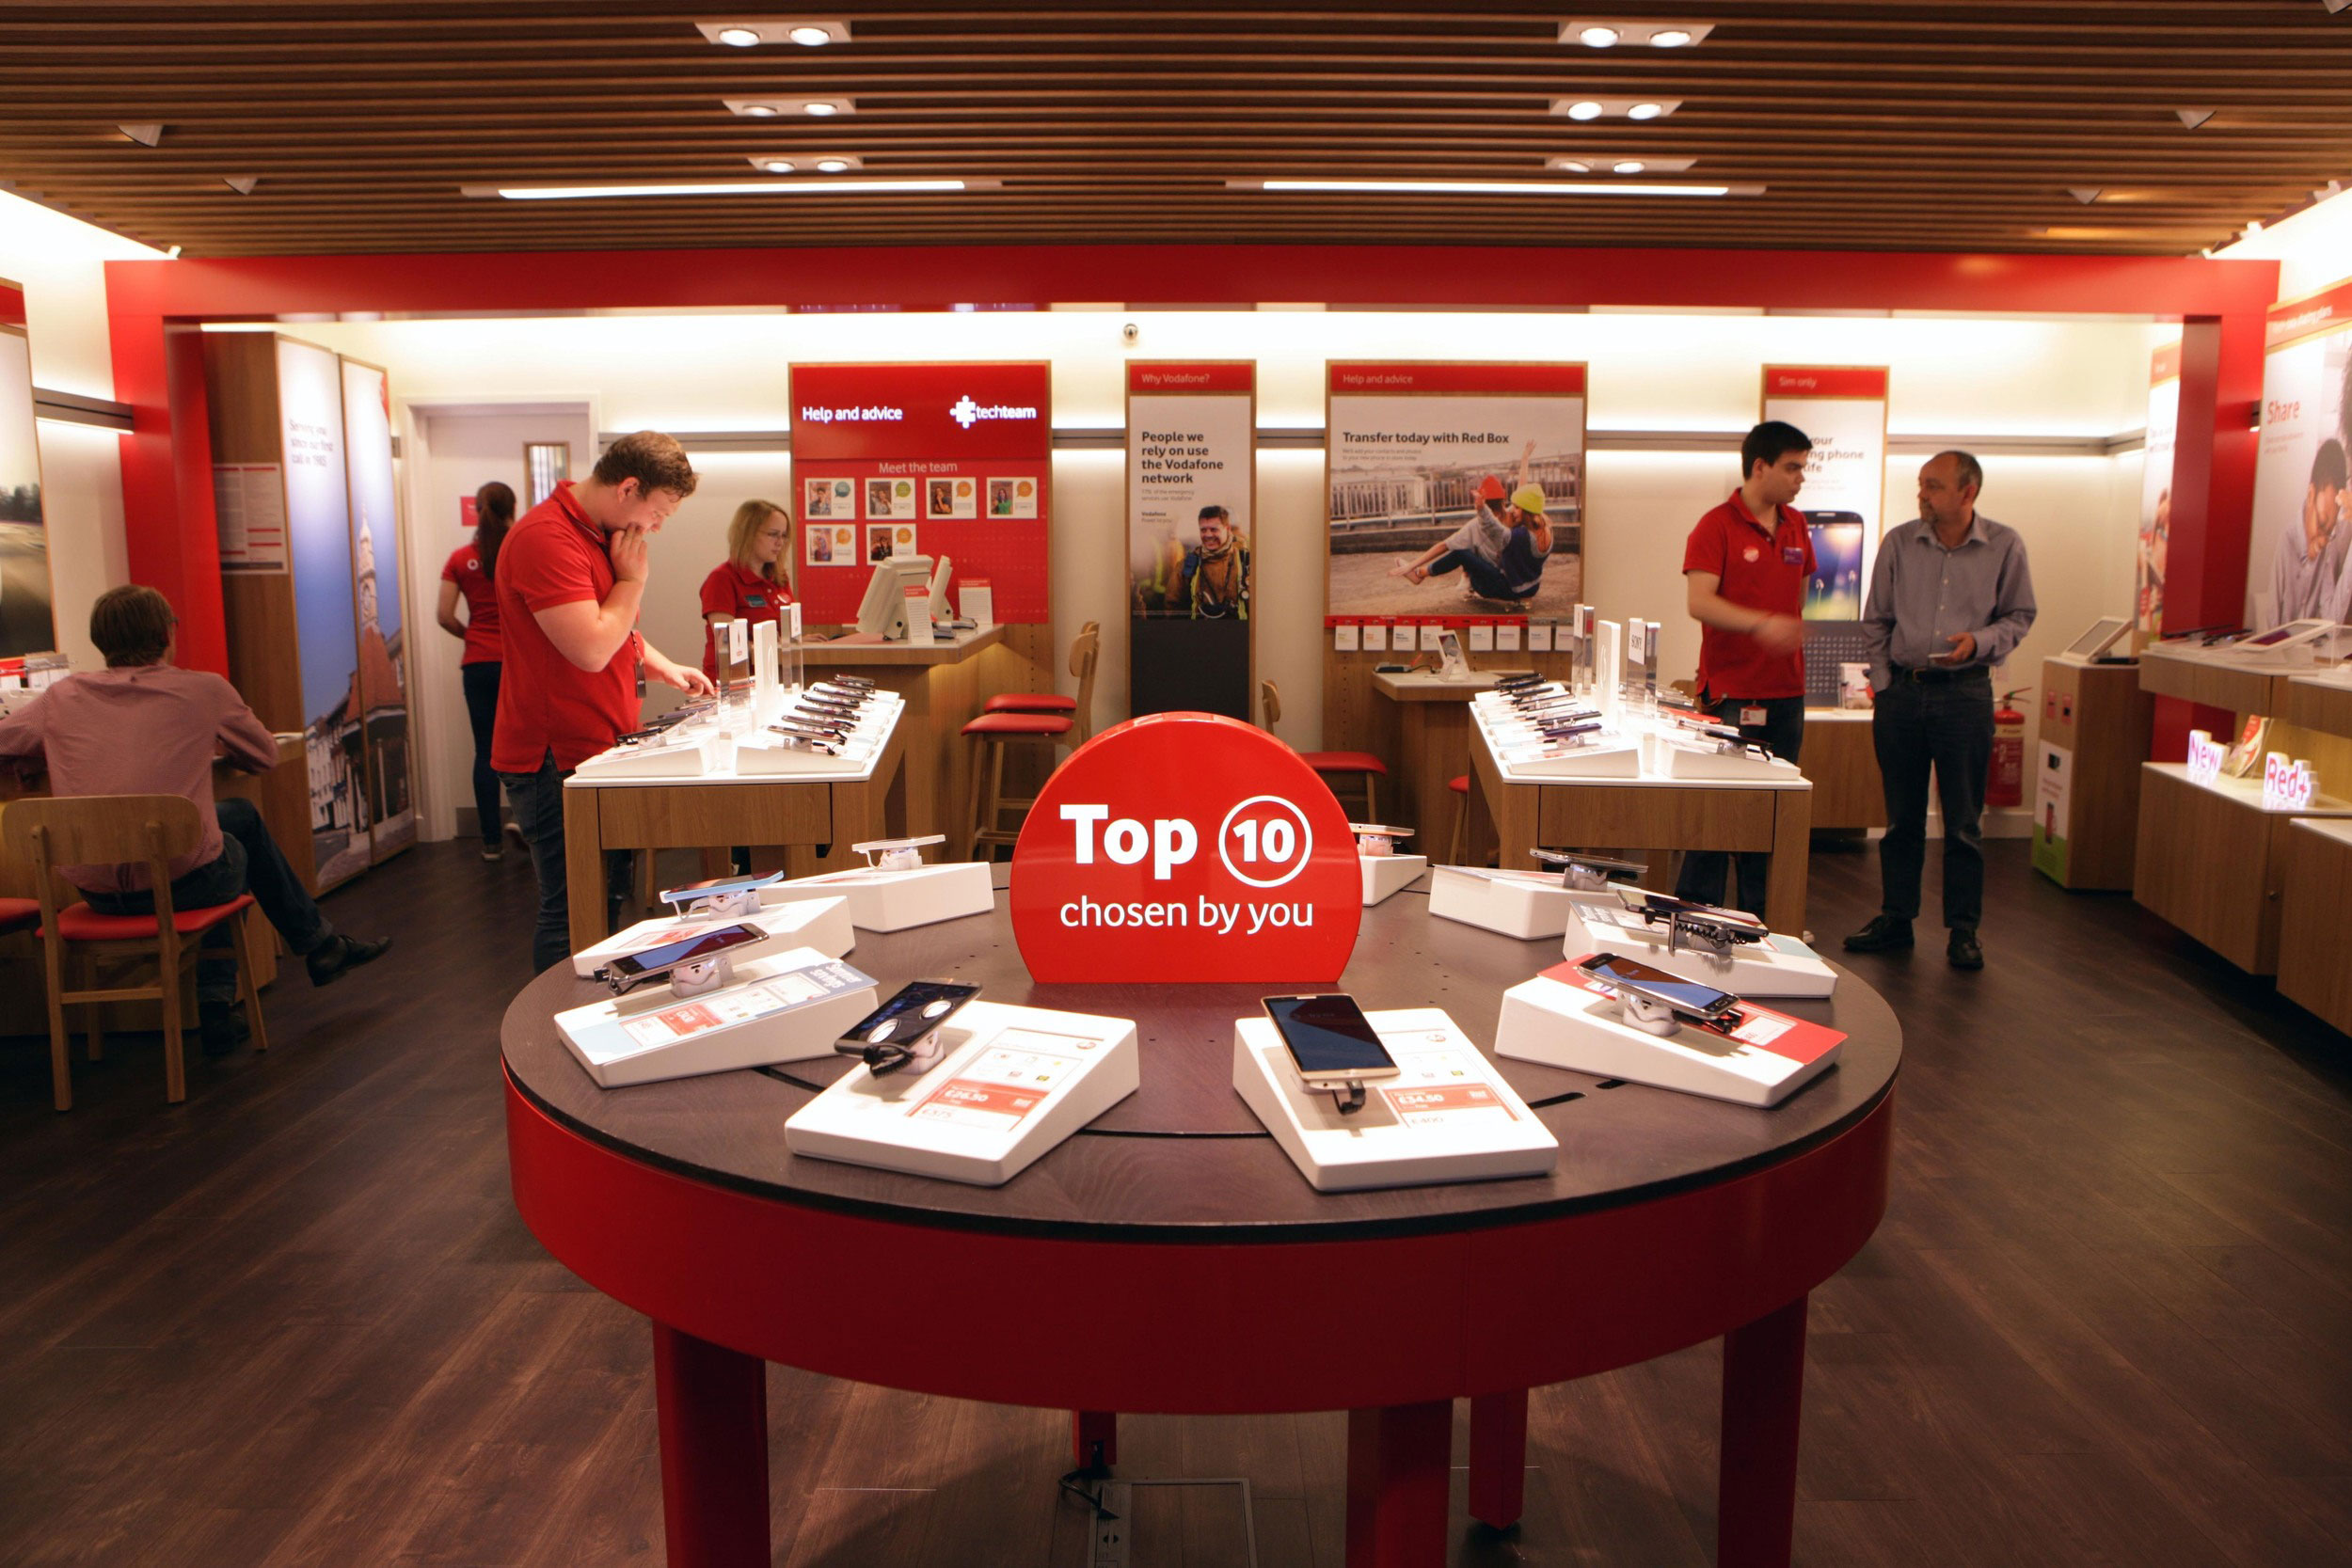 Top 10 phone showcase in a retail store at Vodafone